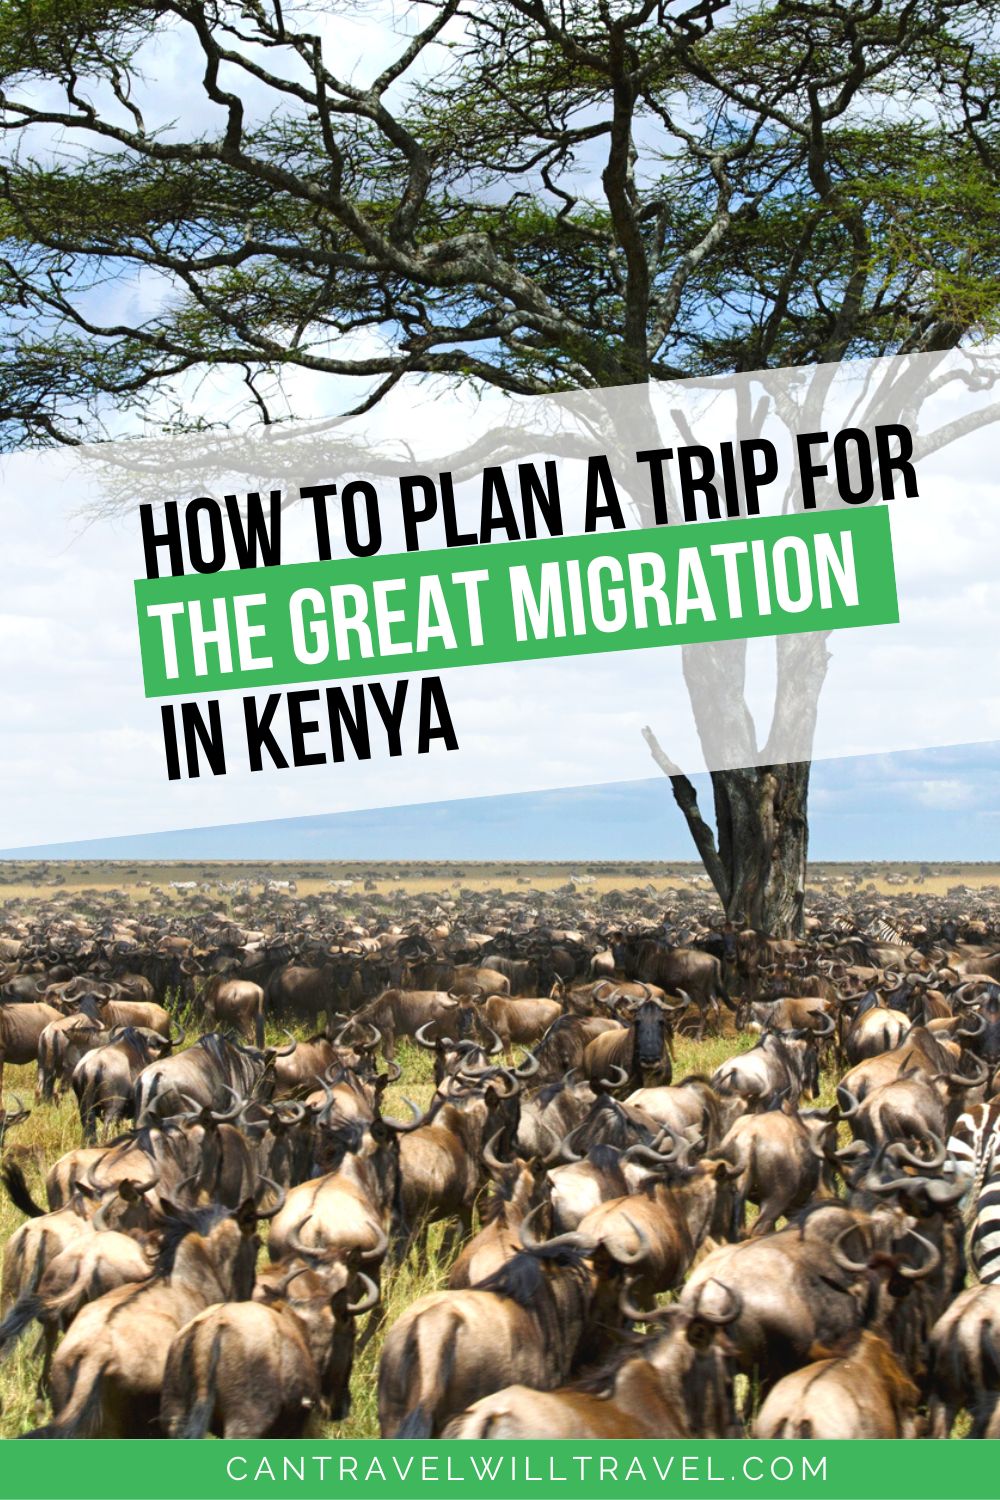 How To Plan a Trip for The Great Migration in Kenya